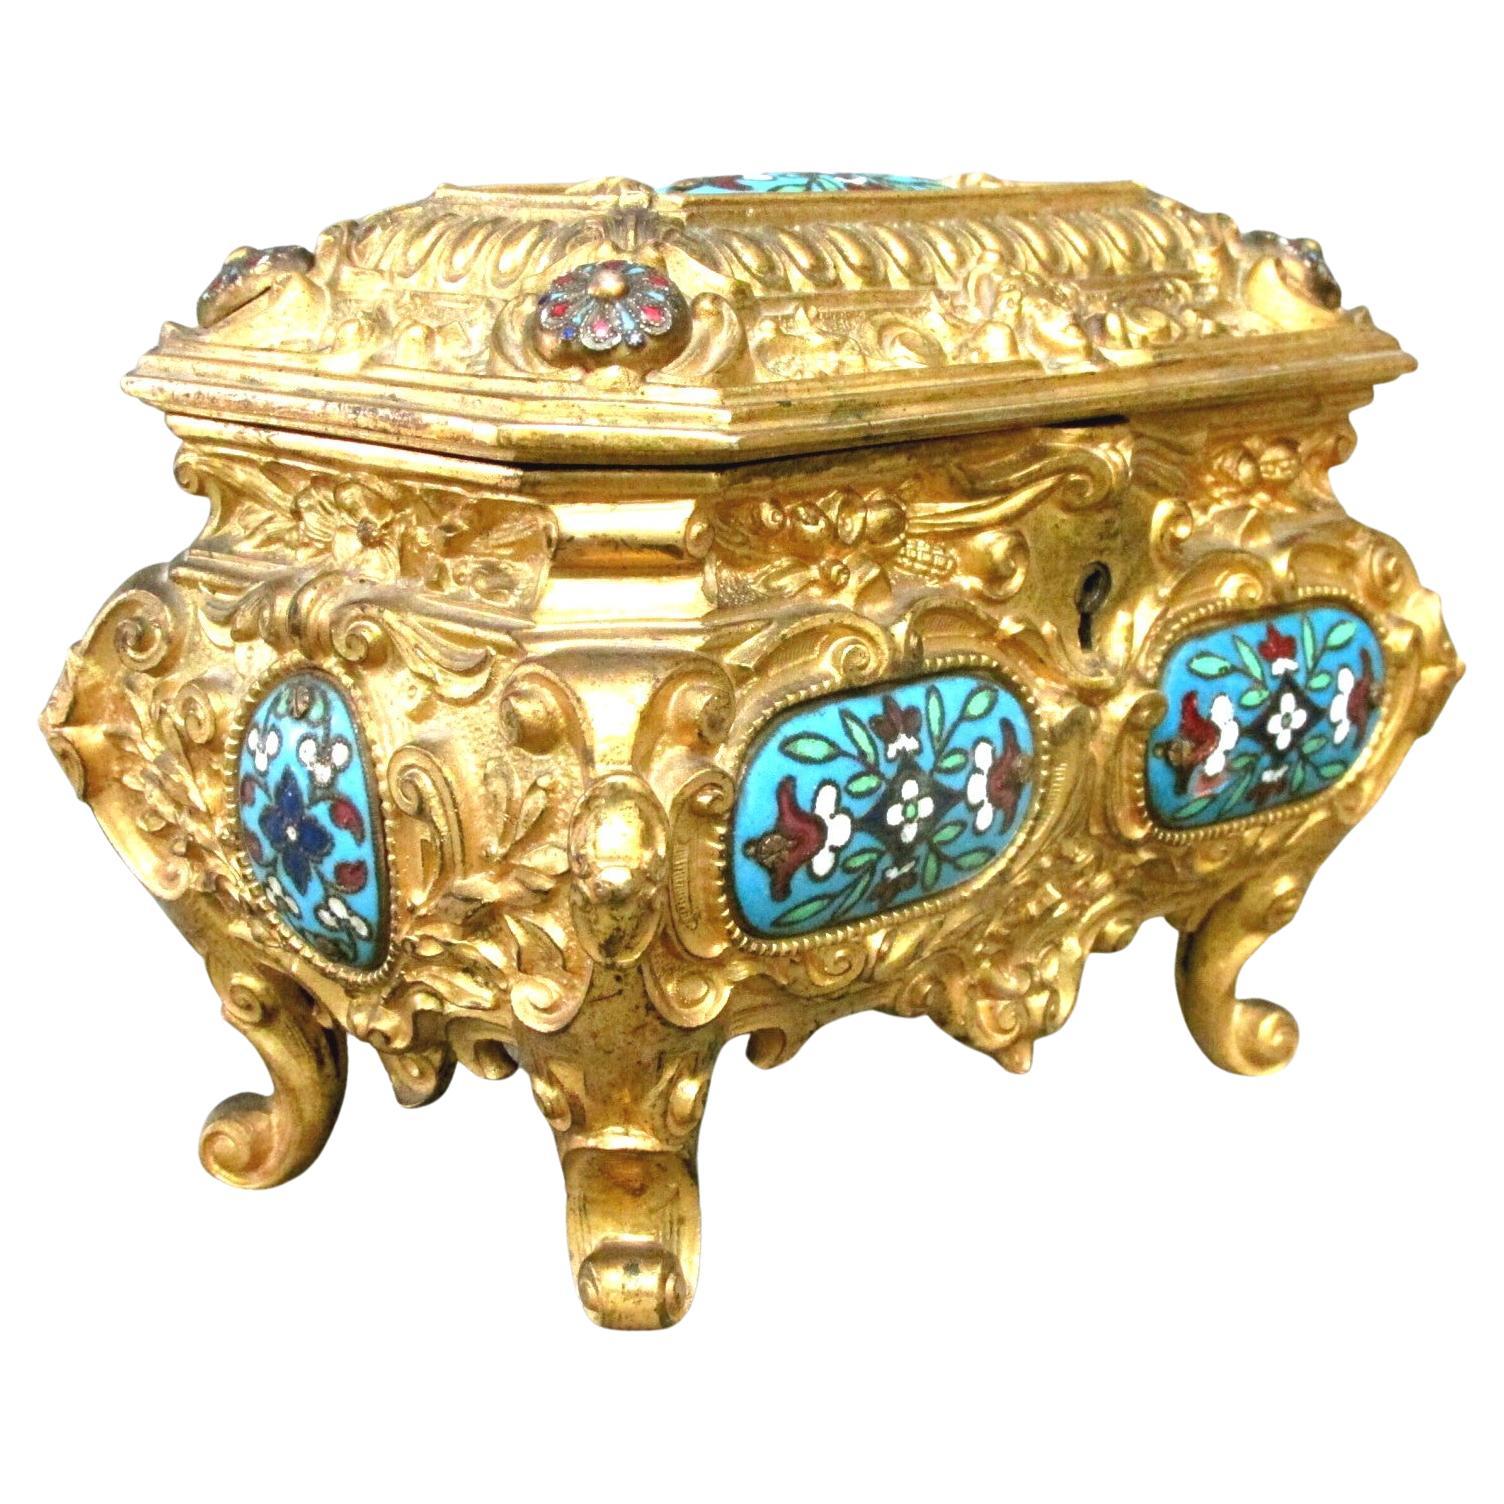 Early 20th Century Rococo Revival Gilt Bronze and Enamel Jewellery Casket  at 1stDibs | casket jewelry, rococo jewelry box